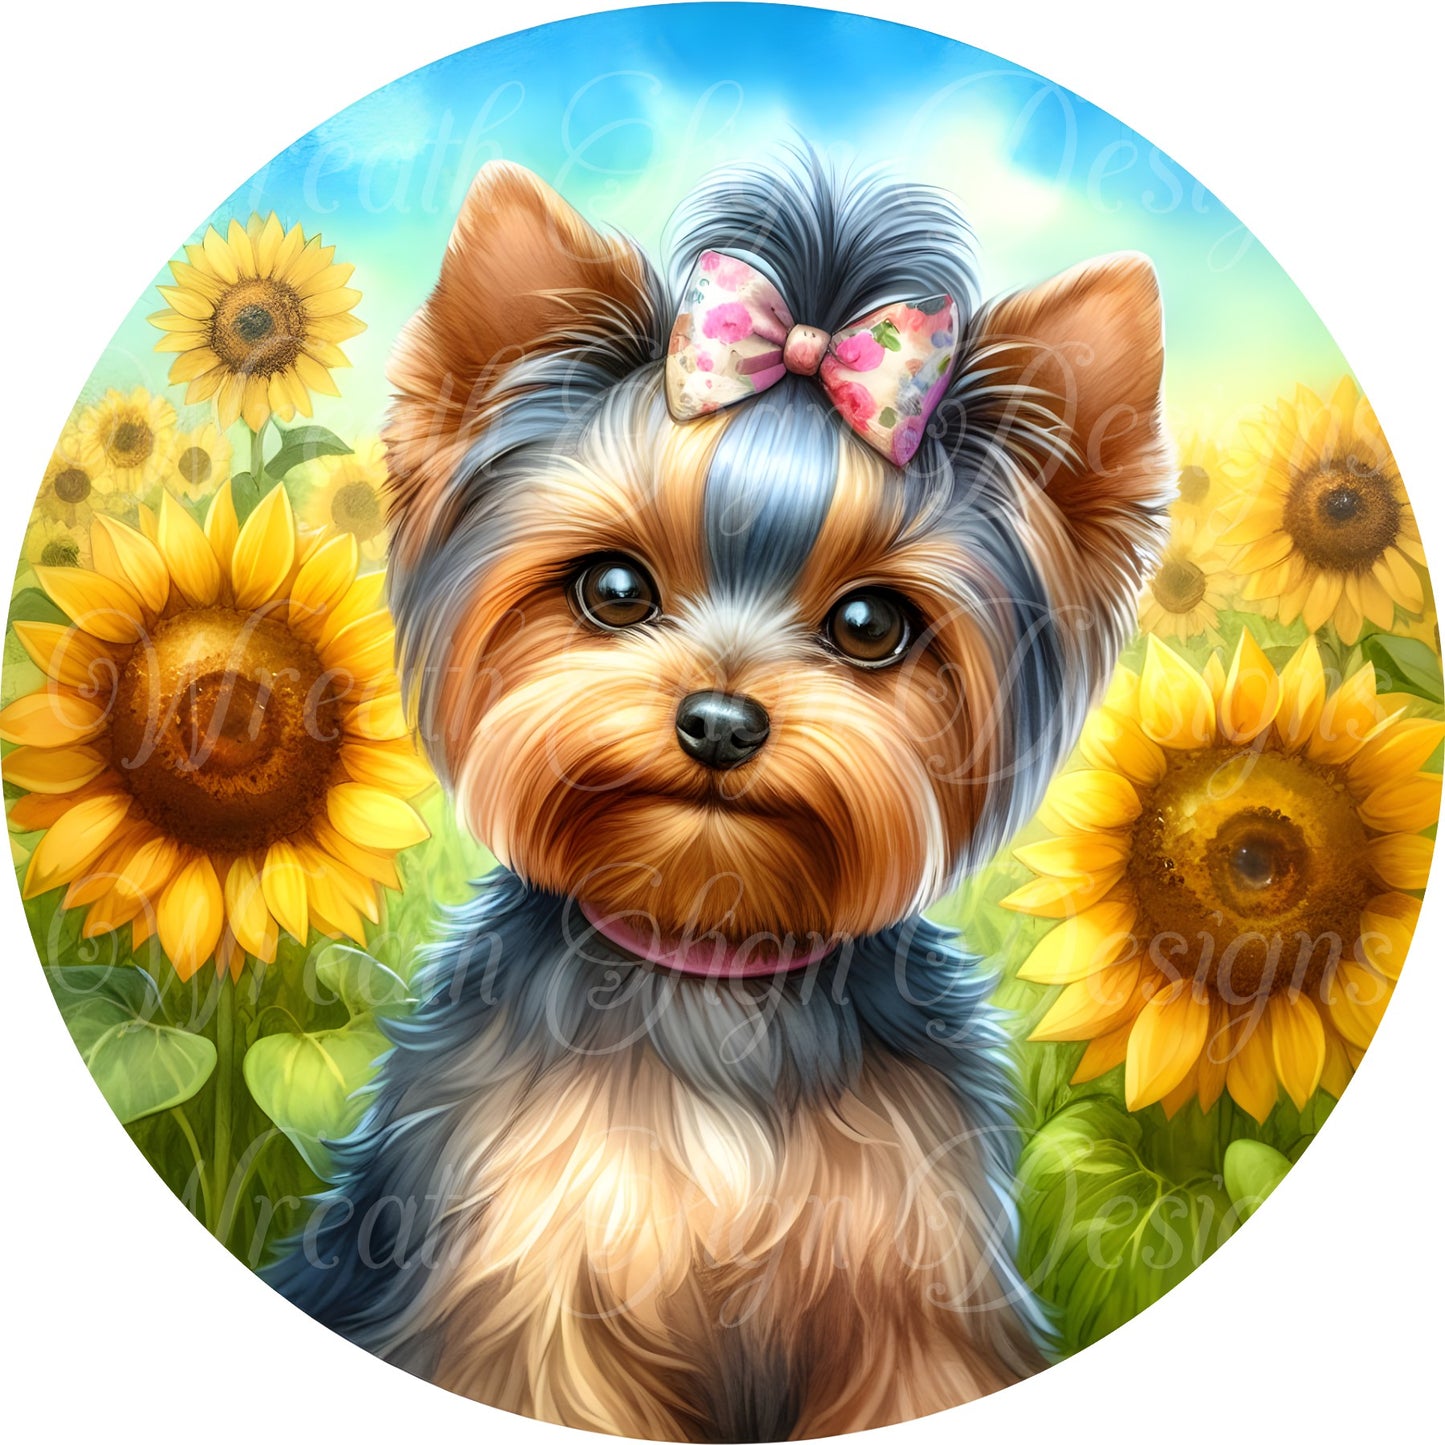 Yorkie dog in the sunflowers round metal wreath sign